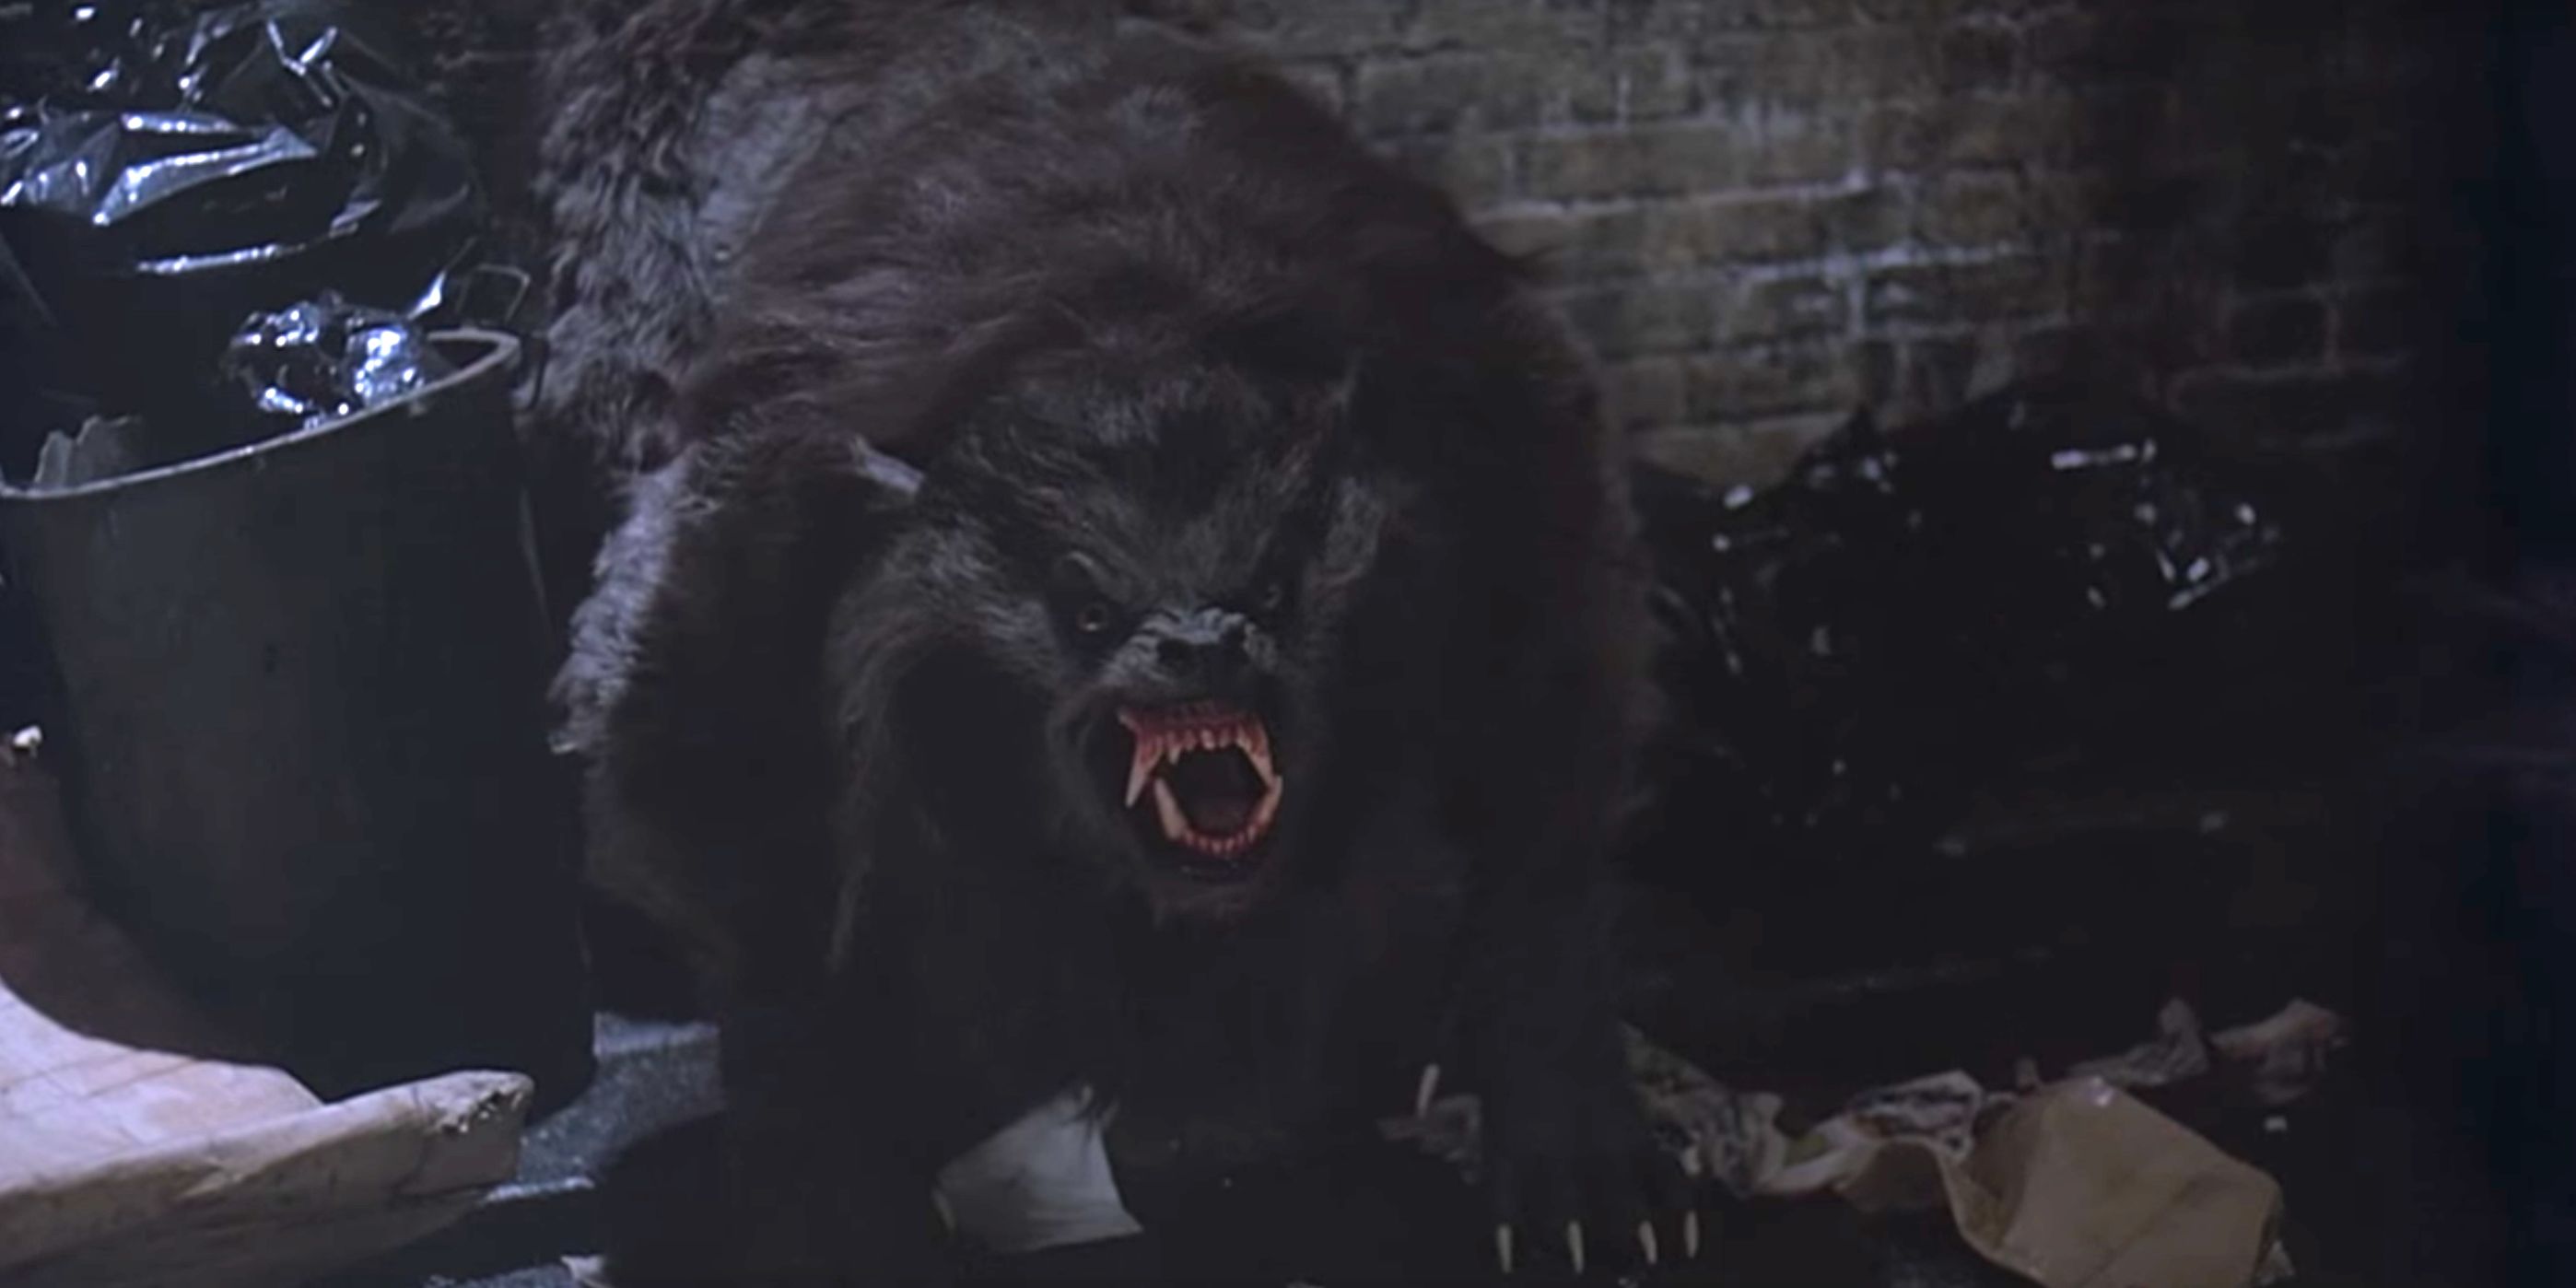 How American Werewolf in London Created the Oscars’ Best Makeup Category